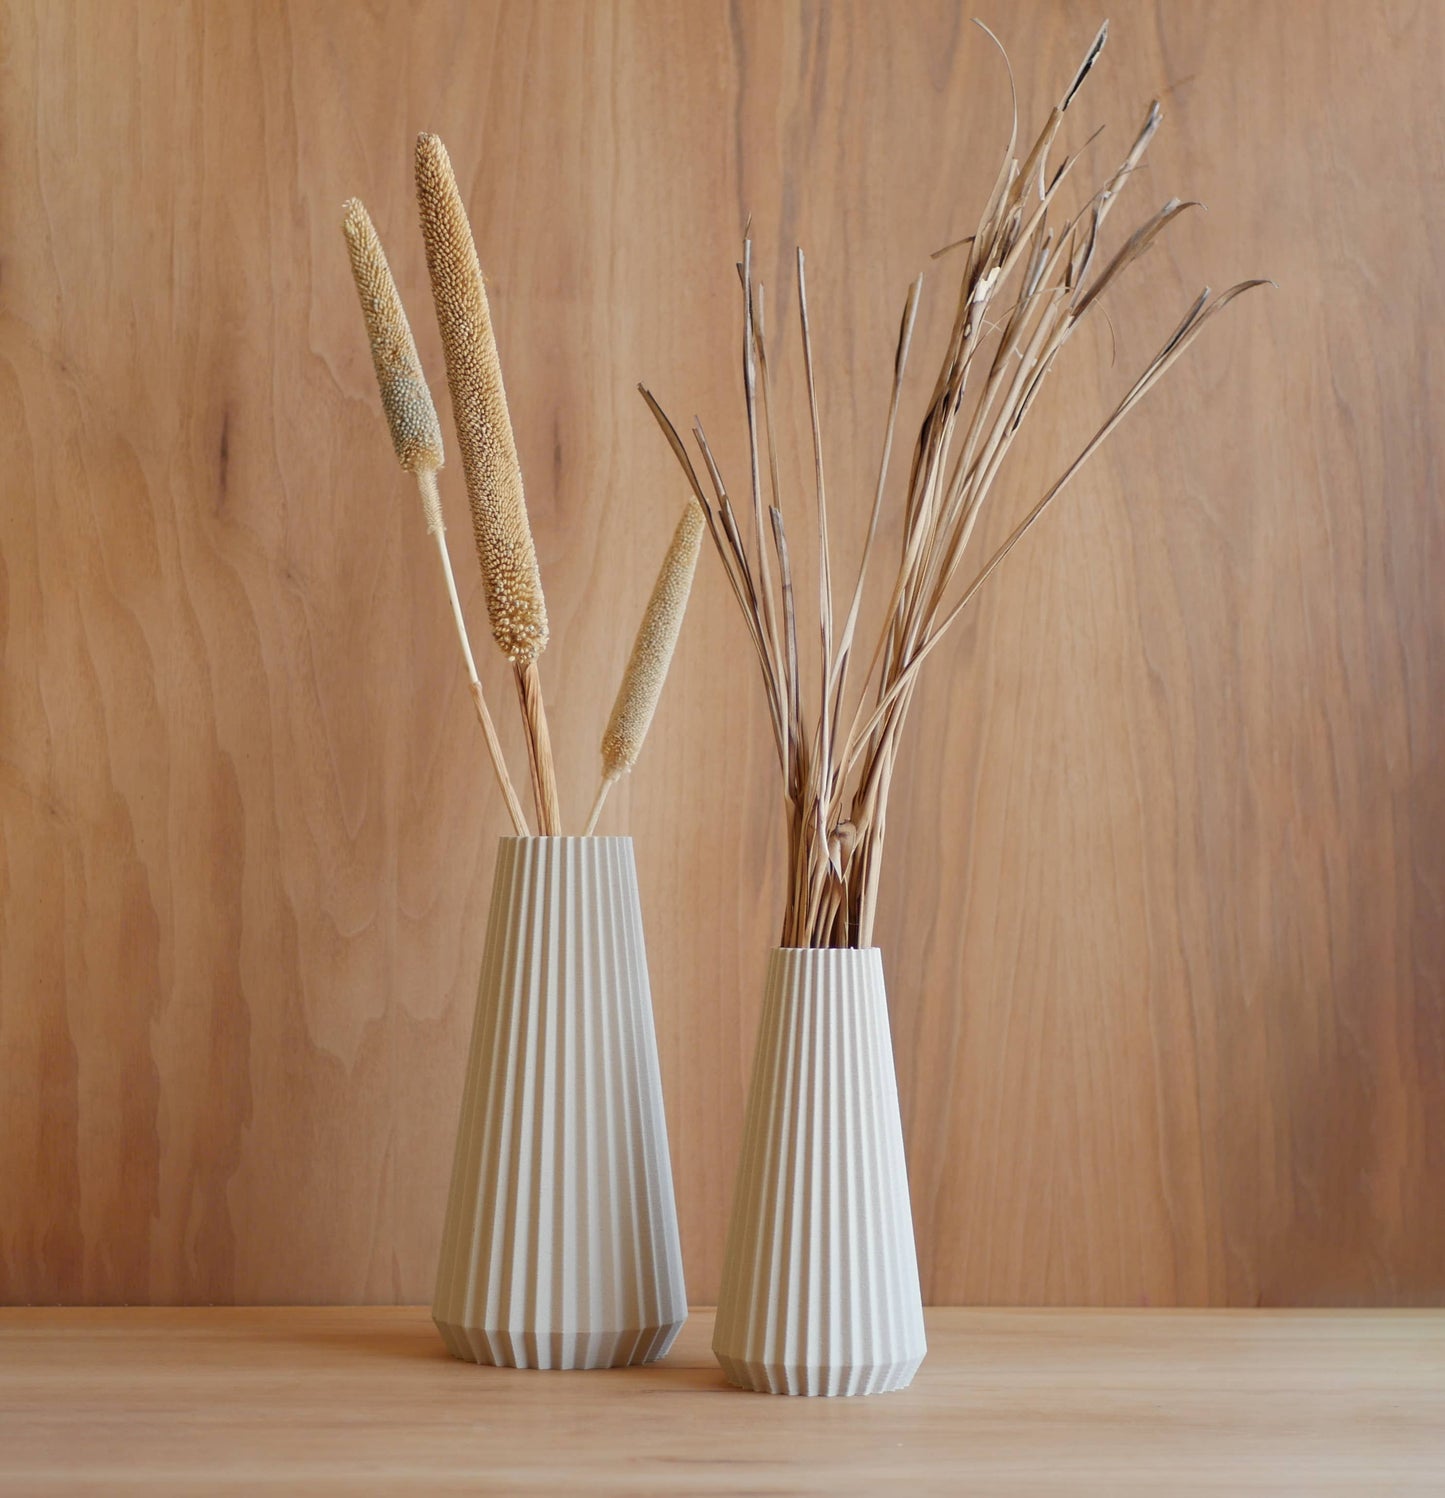 Oisho Vase perfect for dried flowers 2 sizes